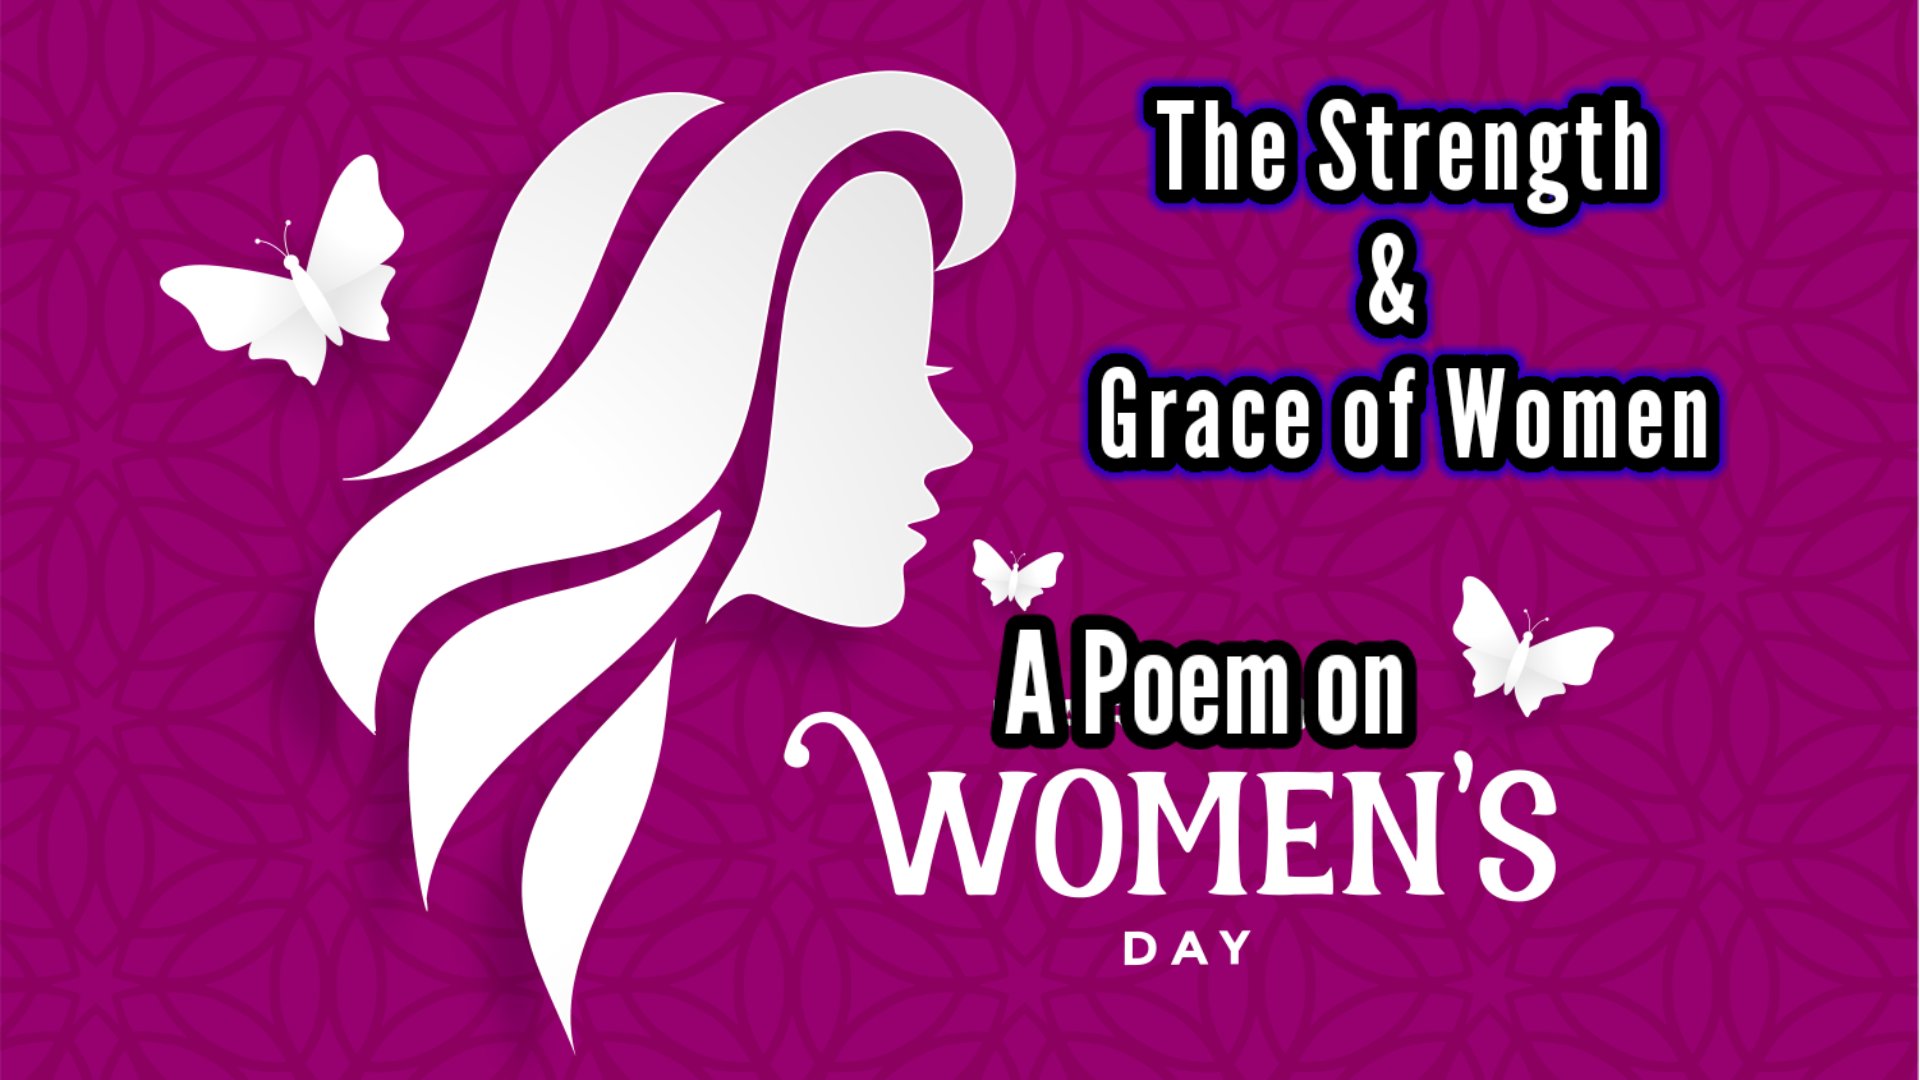 The Strength and Grace of Women: A Poem for International Women's Day Written by Amrit Sahu